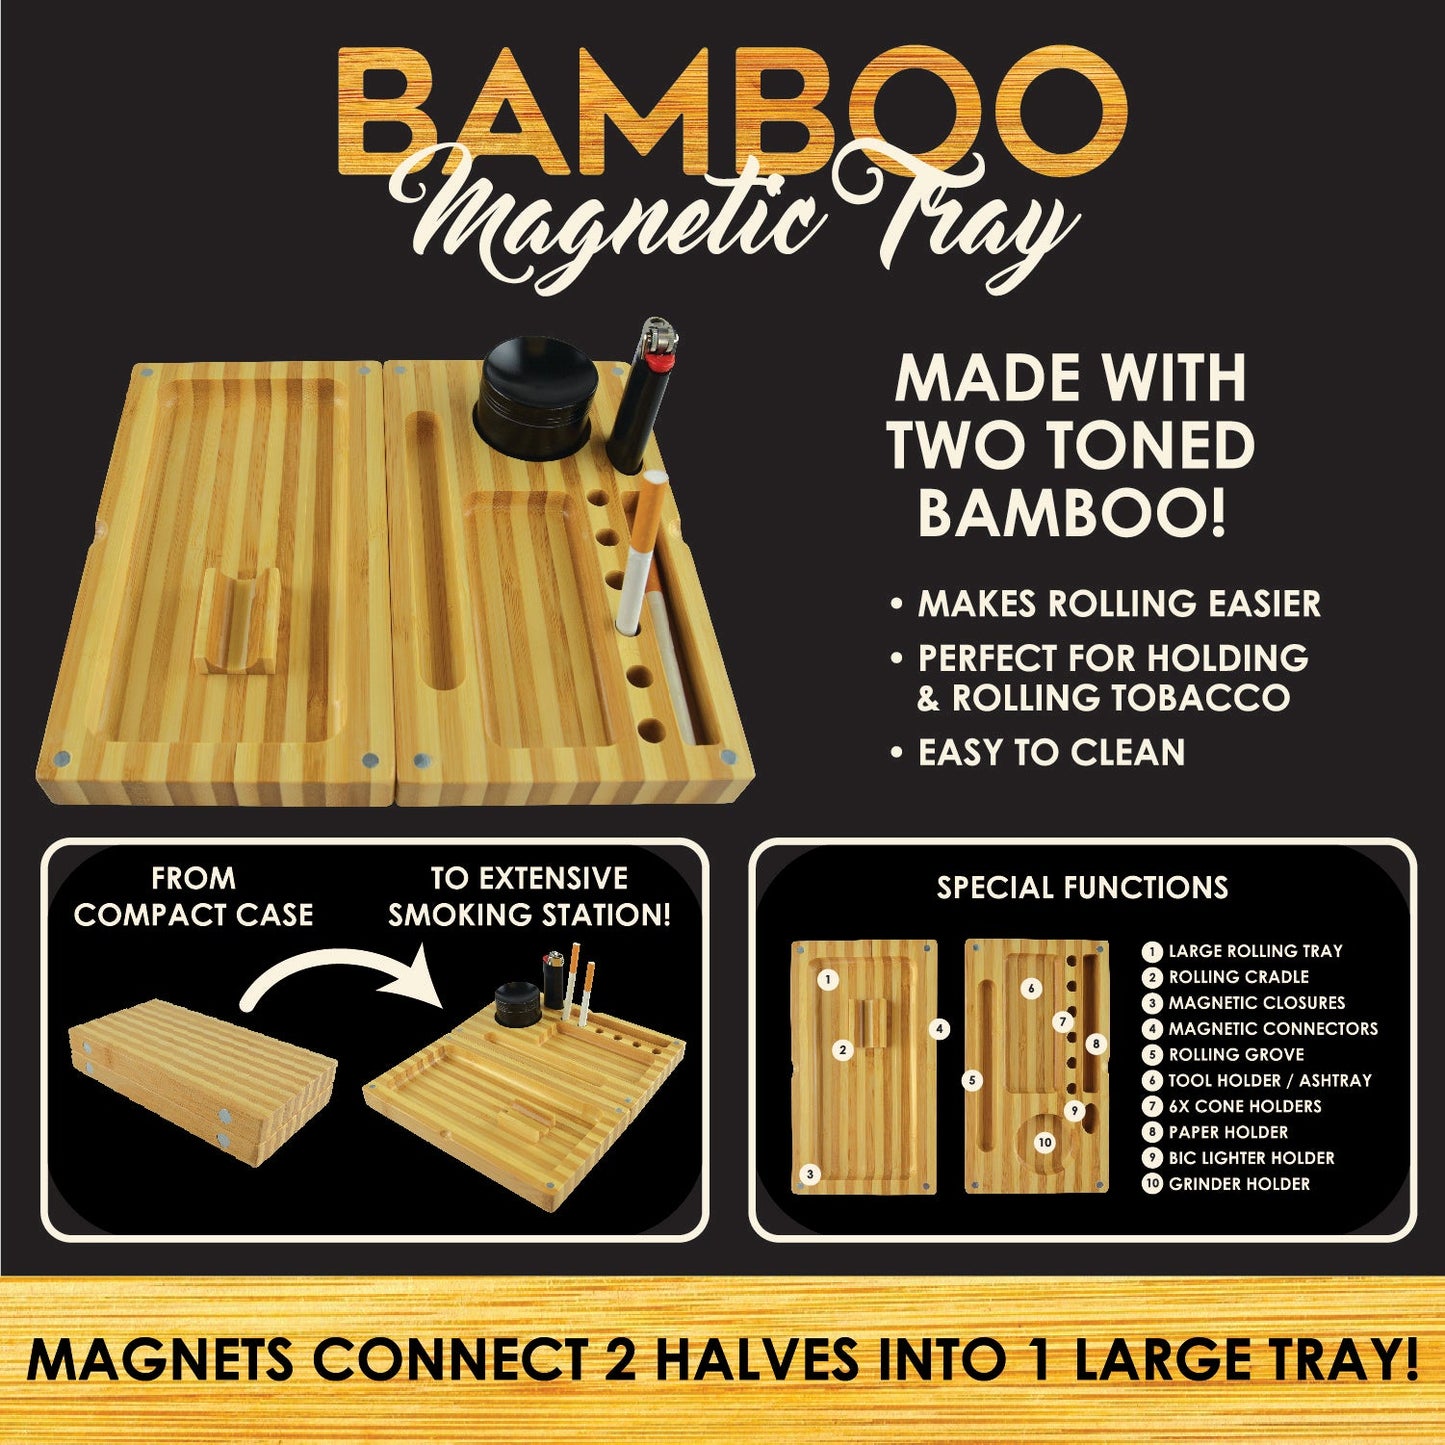 ITEM NUMBER 021917 BAMBOO MAGNETIC TRAY 4 PIECES PER DISPLAY